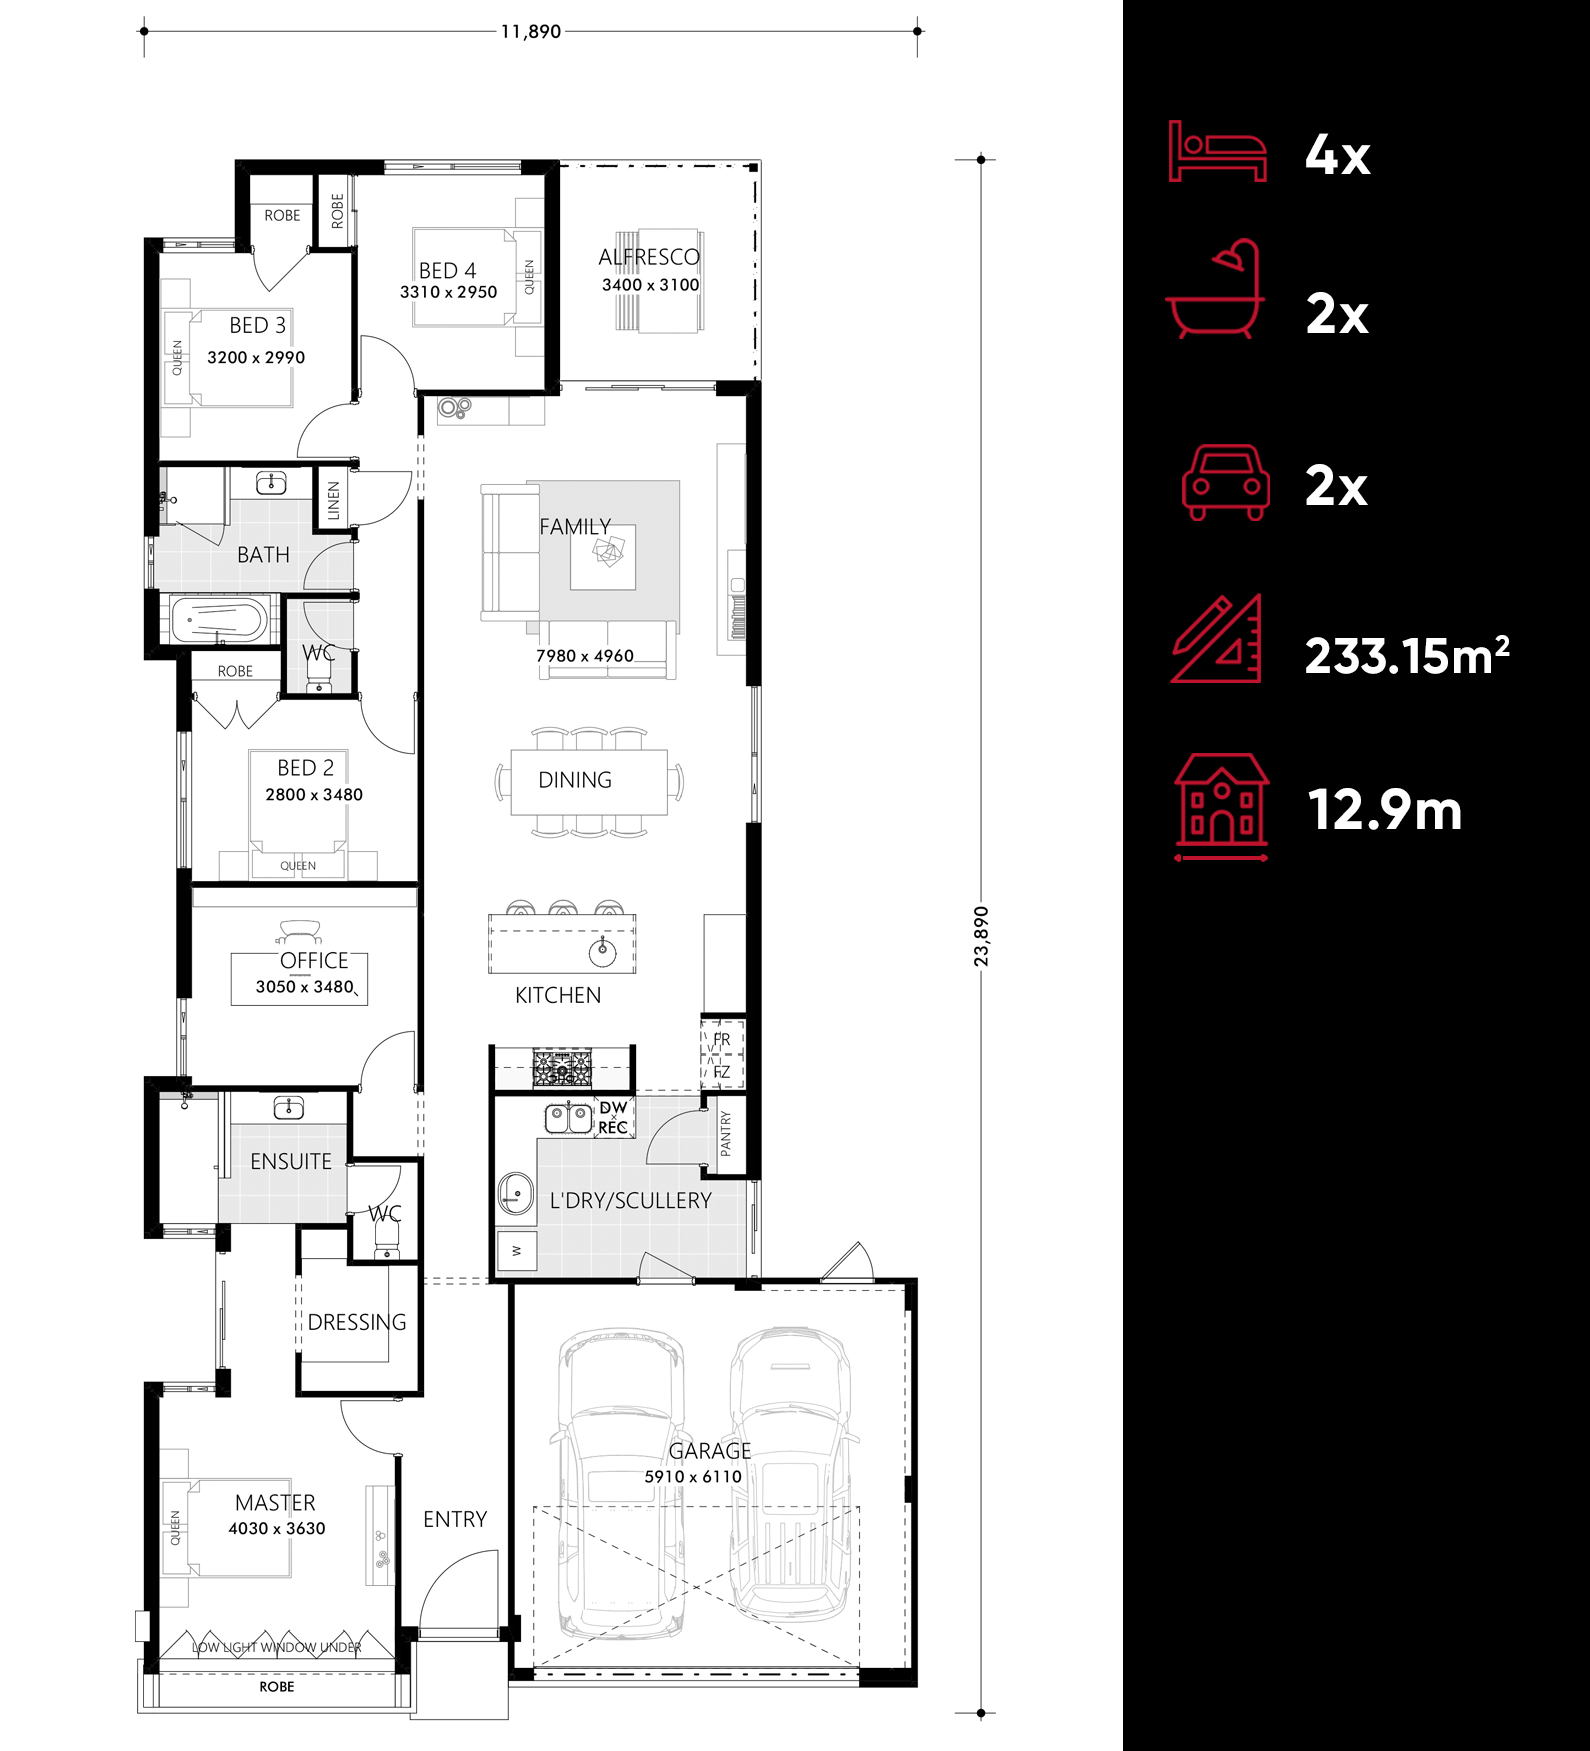 Punk-and-the-Plums floorplan